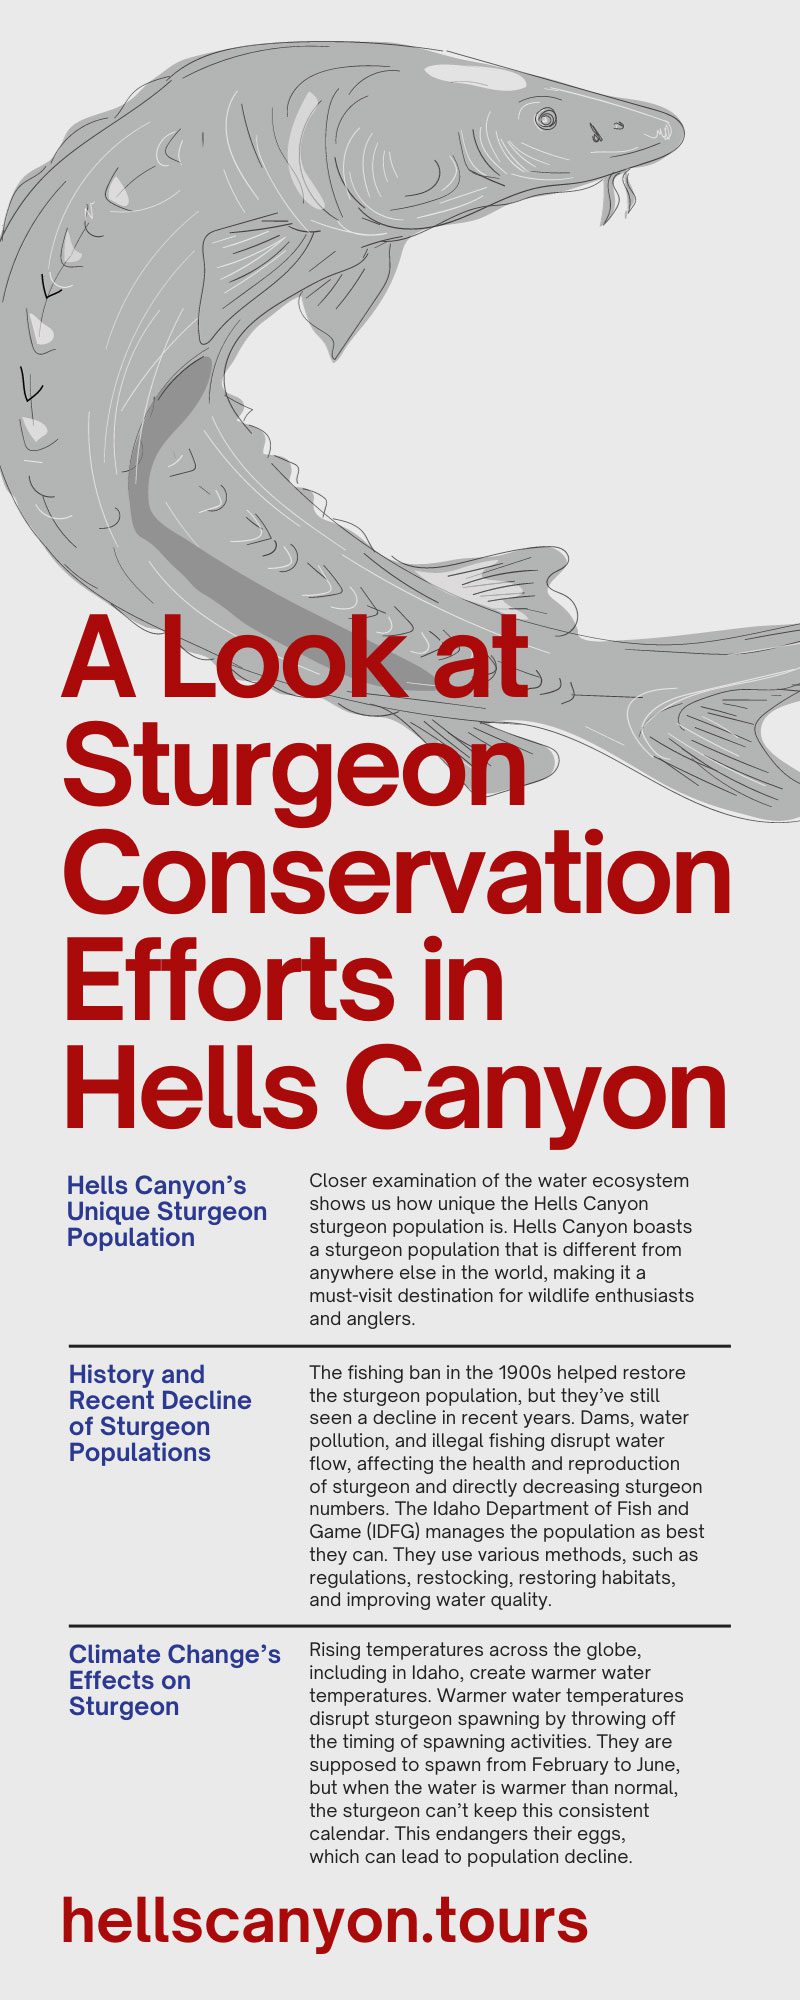 A Look at Sturgeon Conservation Efforts in Hells Canyon